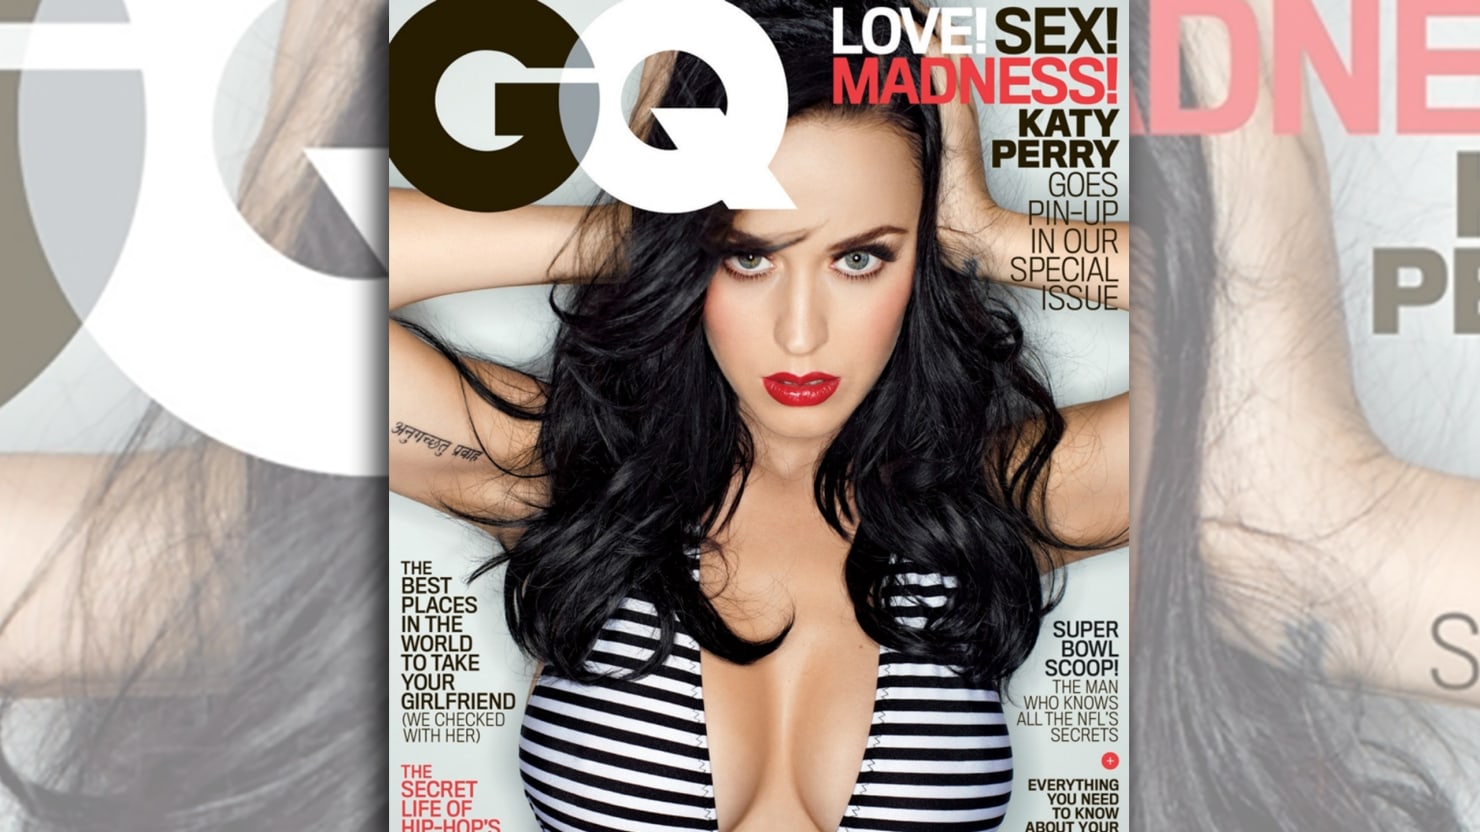 Katy Perry Foot Porn - Katy Perry Lost Her Virginity in a Volvo